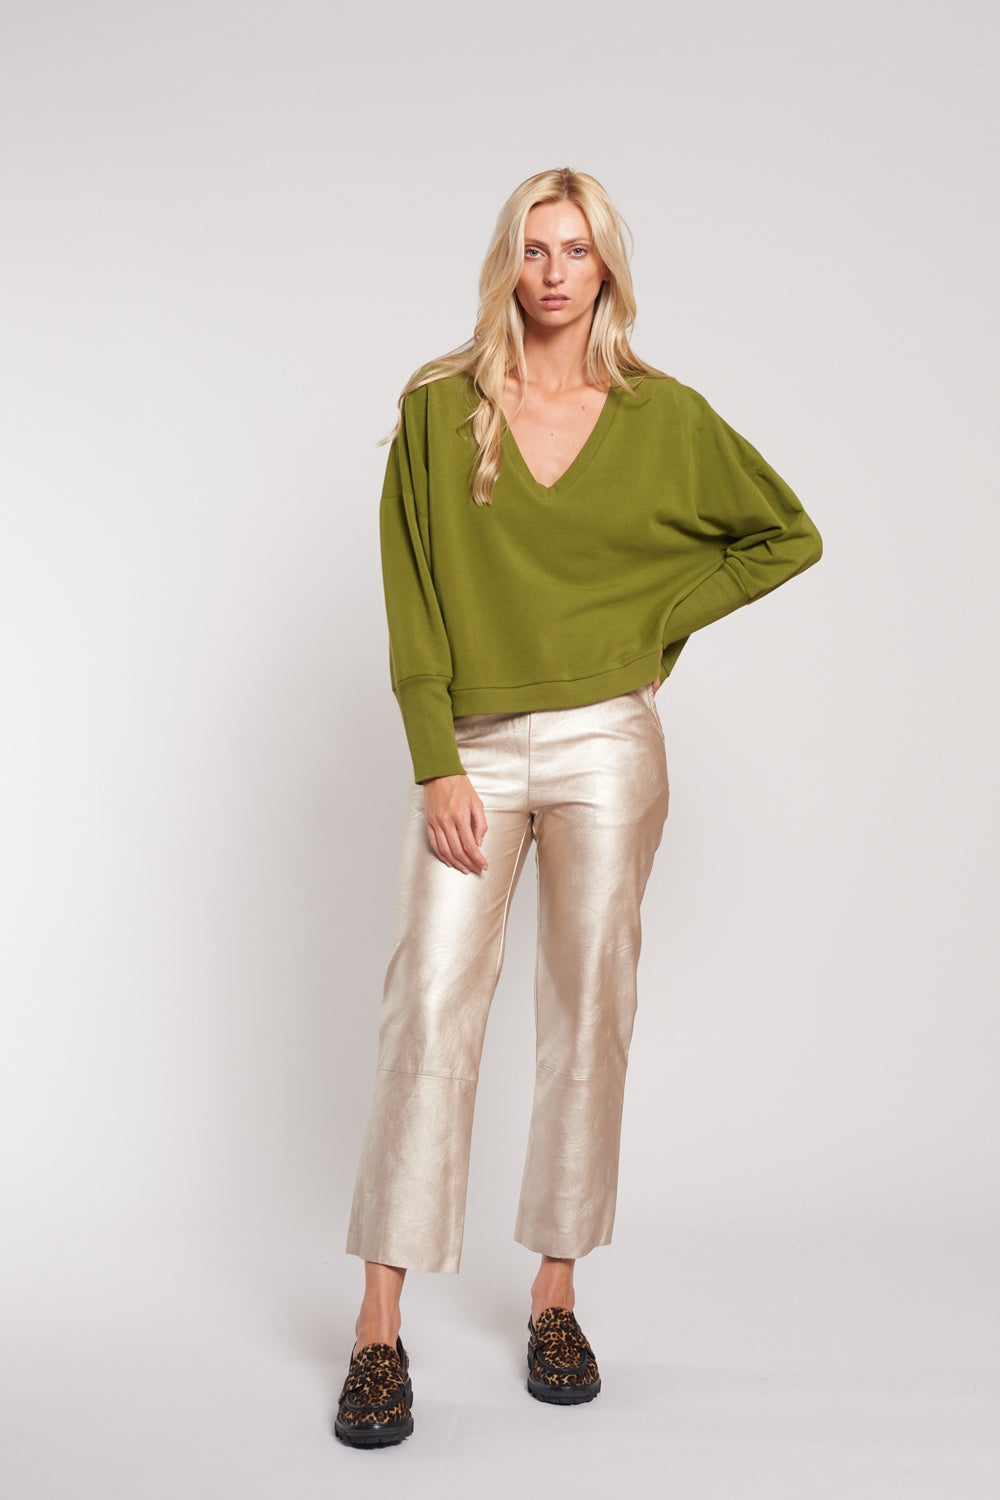 COUTURE V NECK SWEAT winetr 23 24